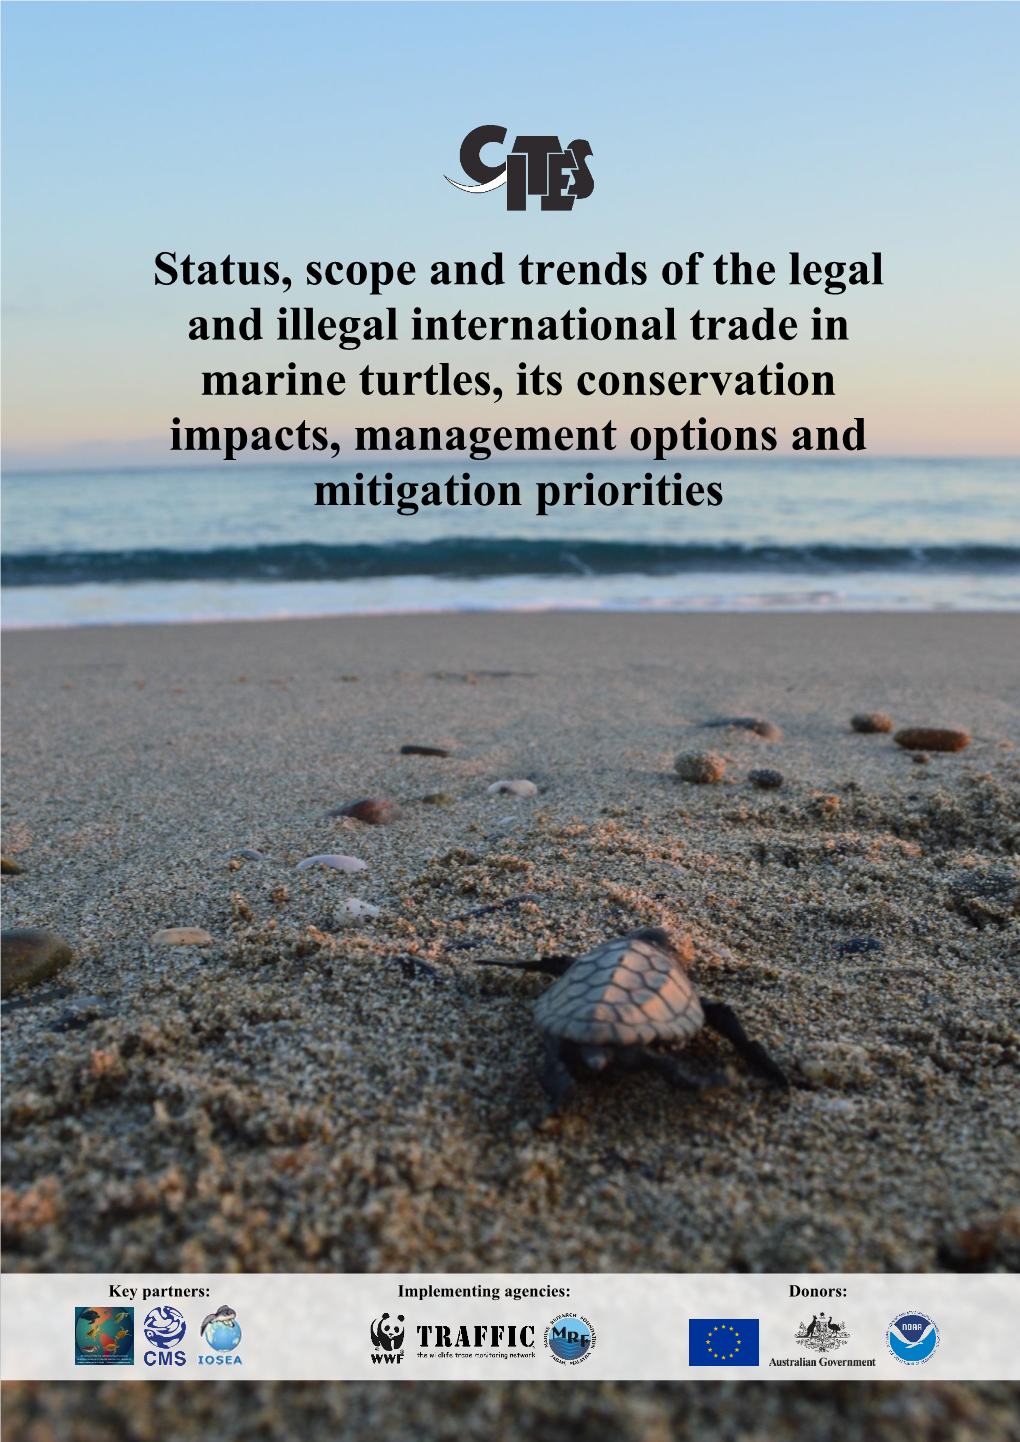 Status, Scope and Trends of the Legal and Illegal International Trade in Marine Turtles, Its Conservation Impacts, Management Options and Mitigation Priorities